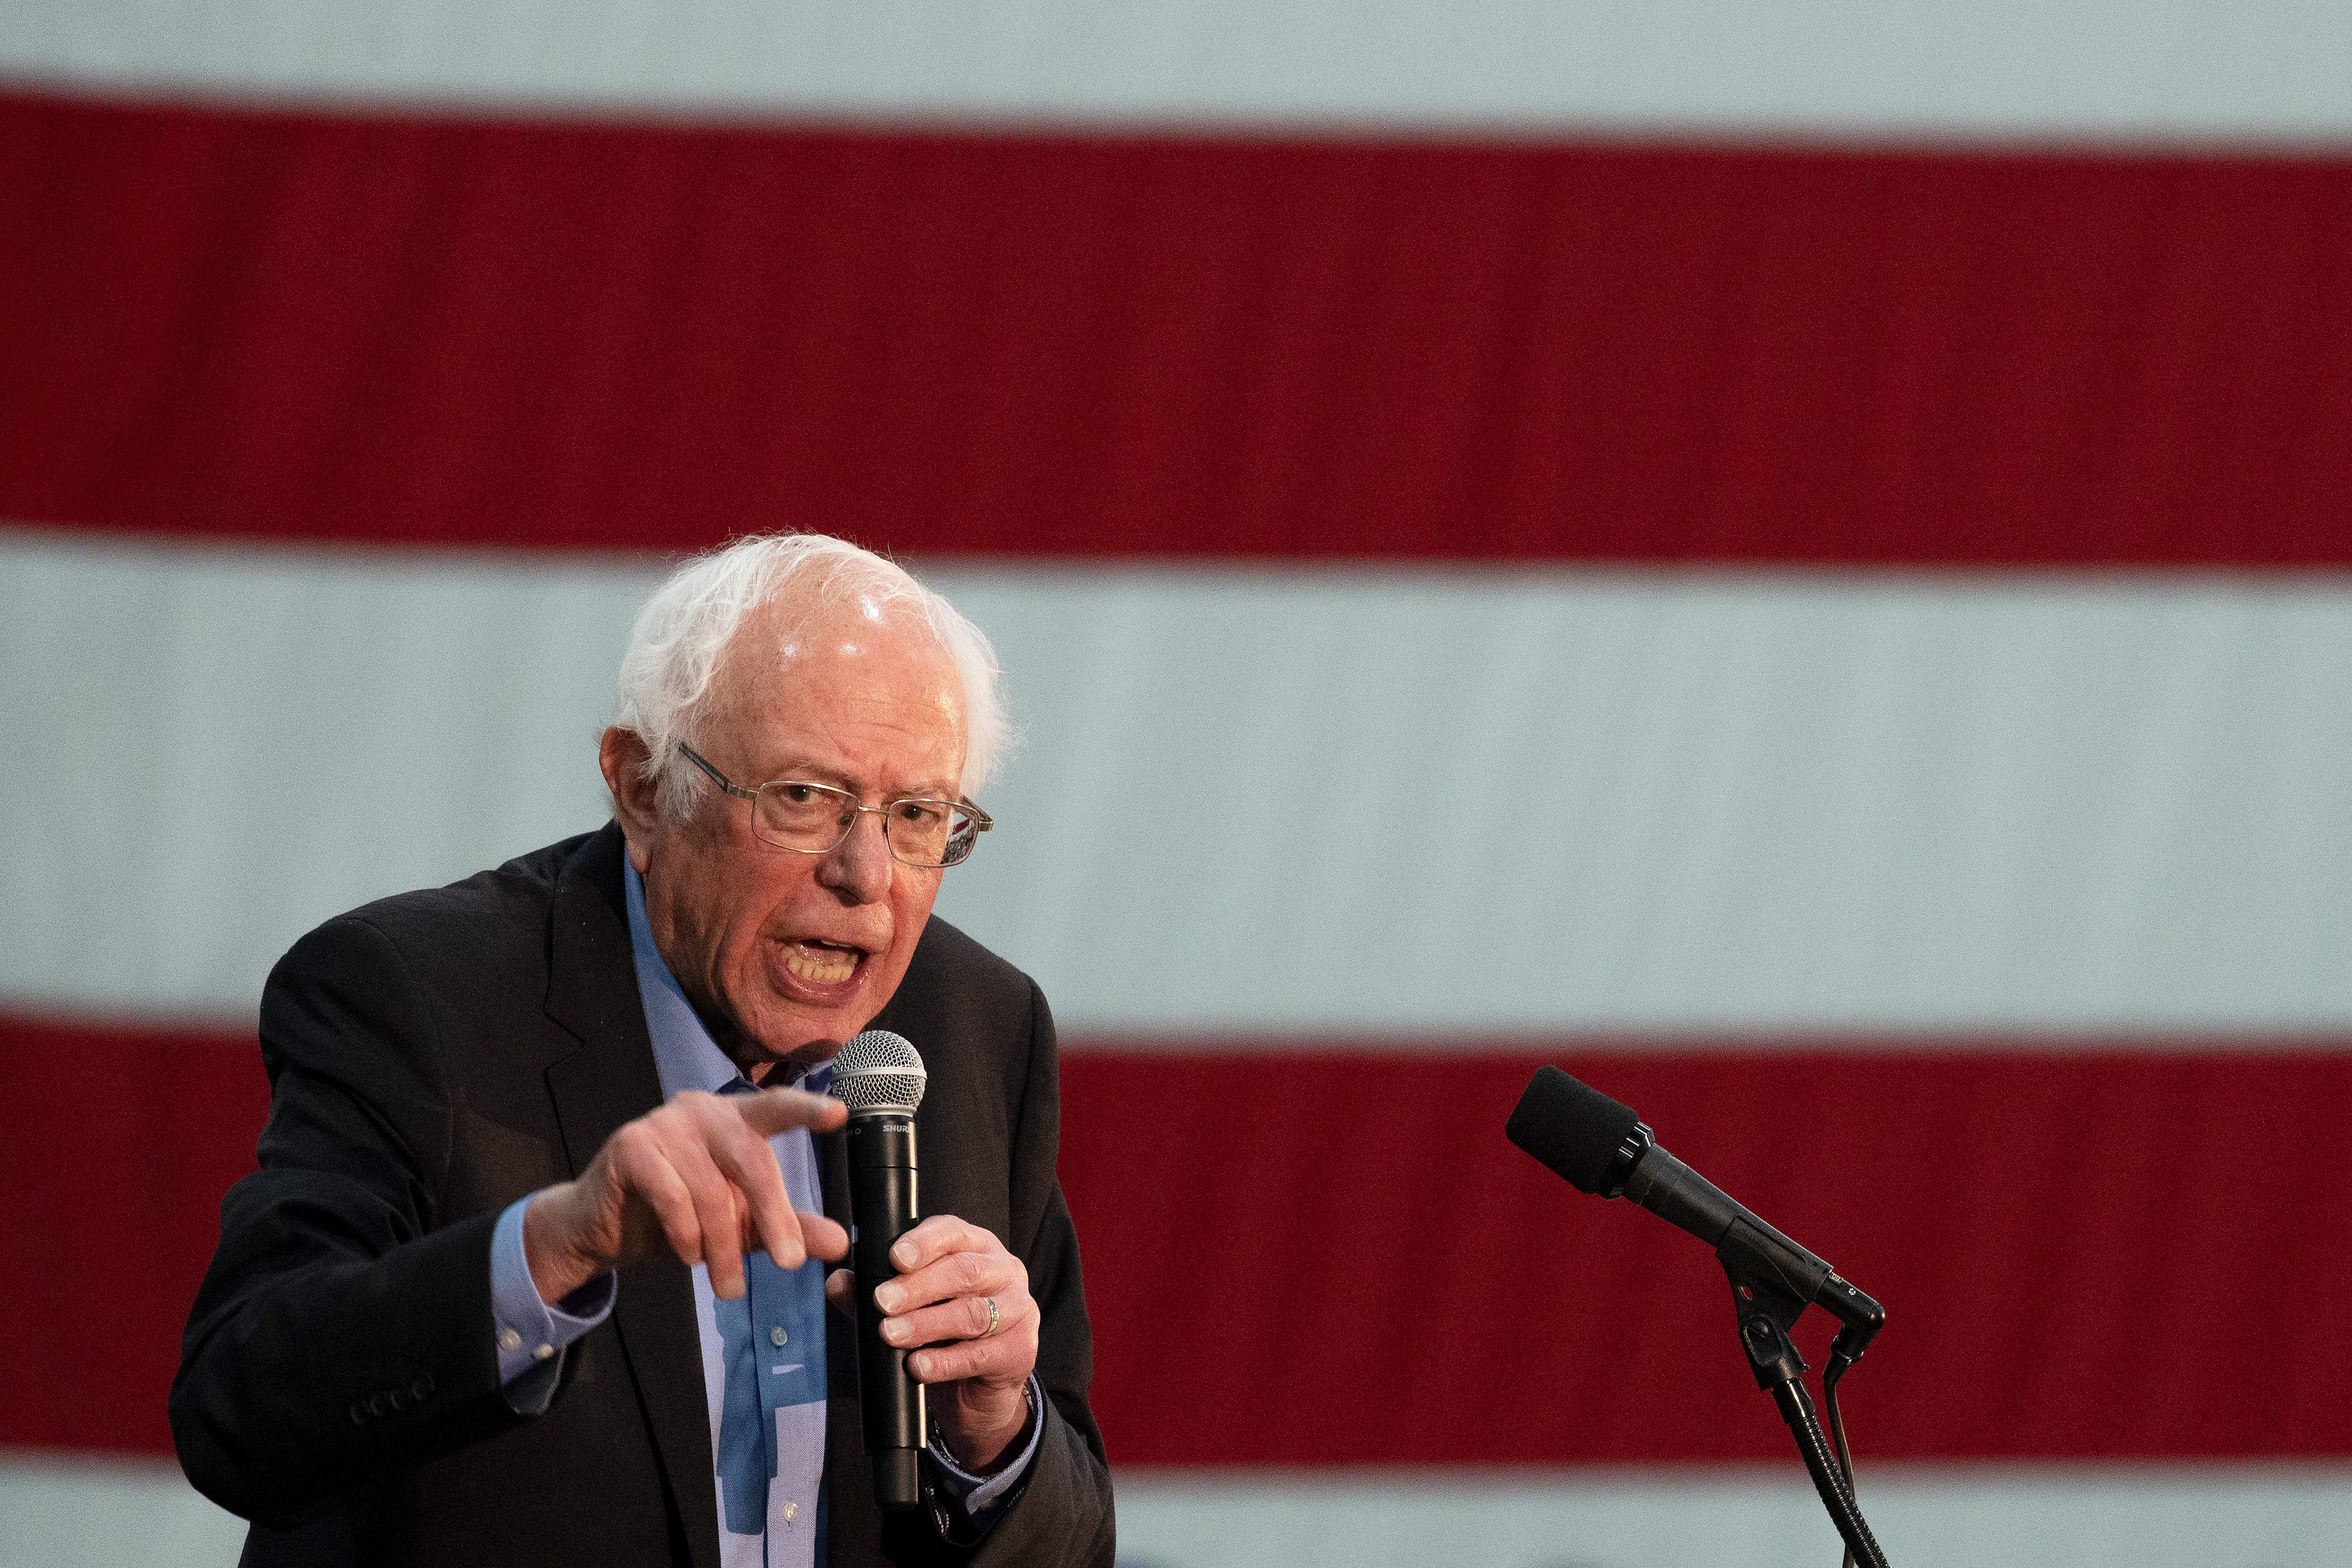 Bernie Sanders, standing in front of an American flag, speaks into a microphone.